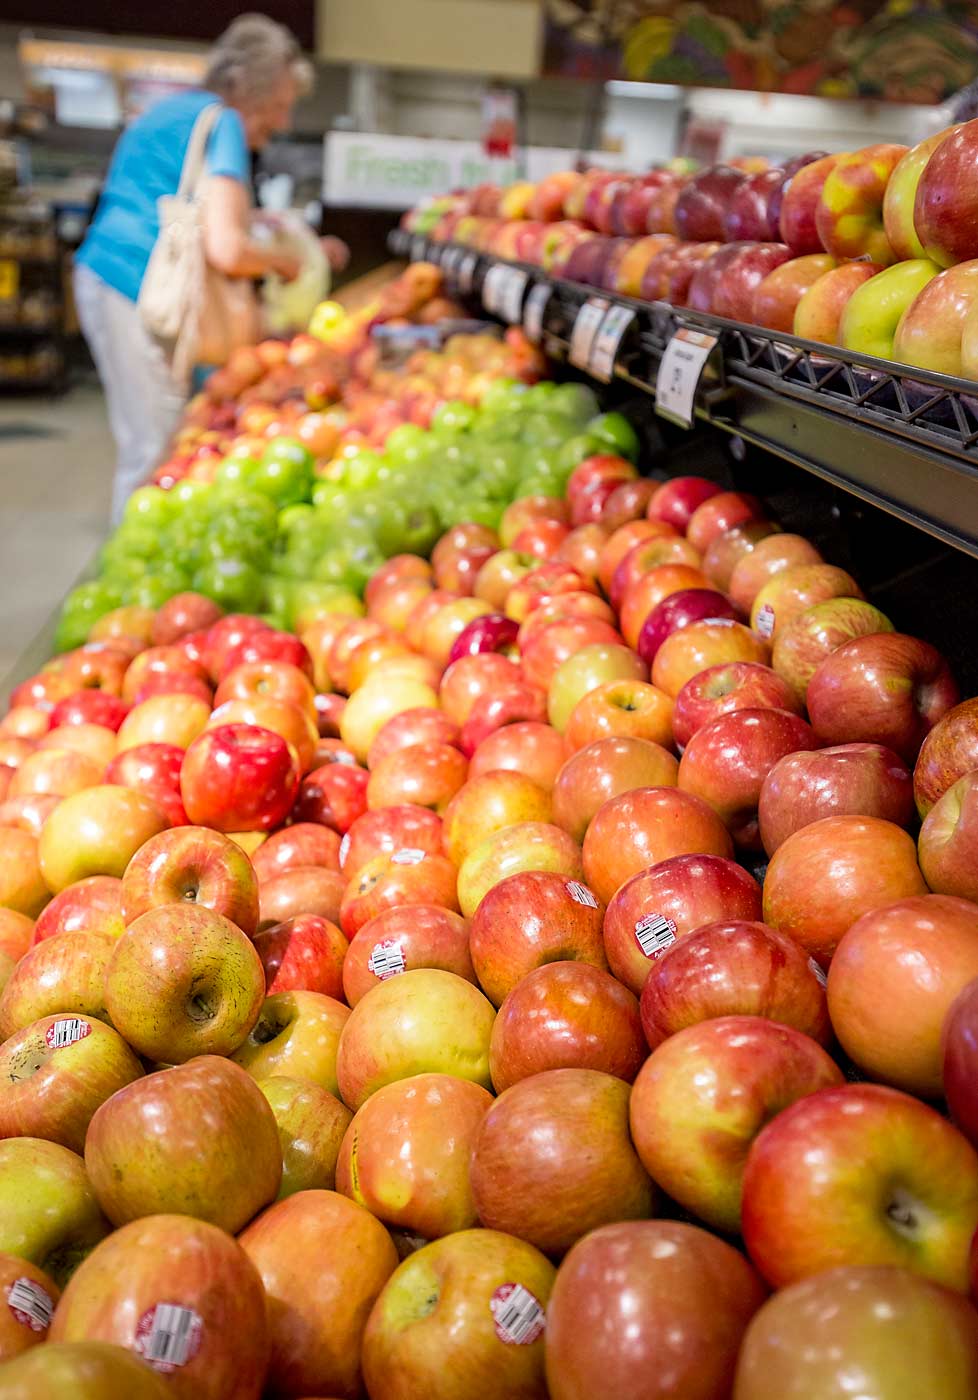 Are consumers confused by too many apple varieties? - Good Fruit Grower